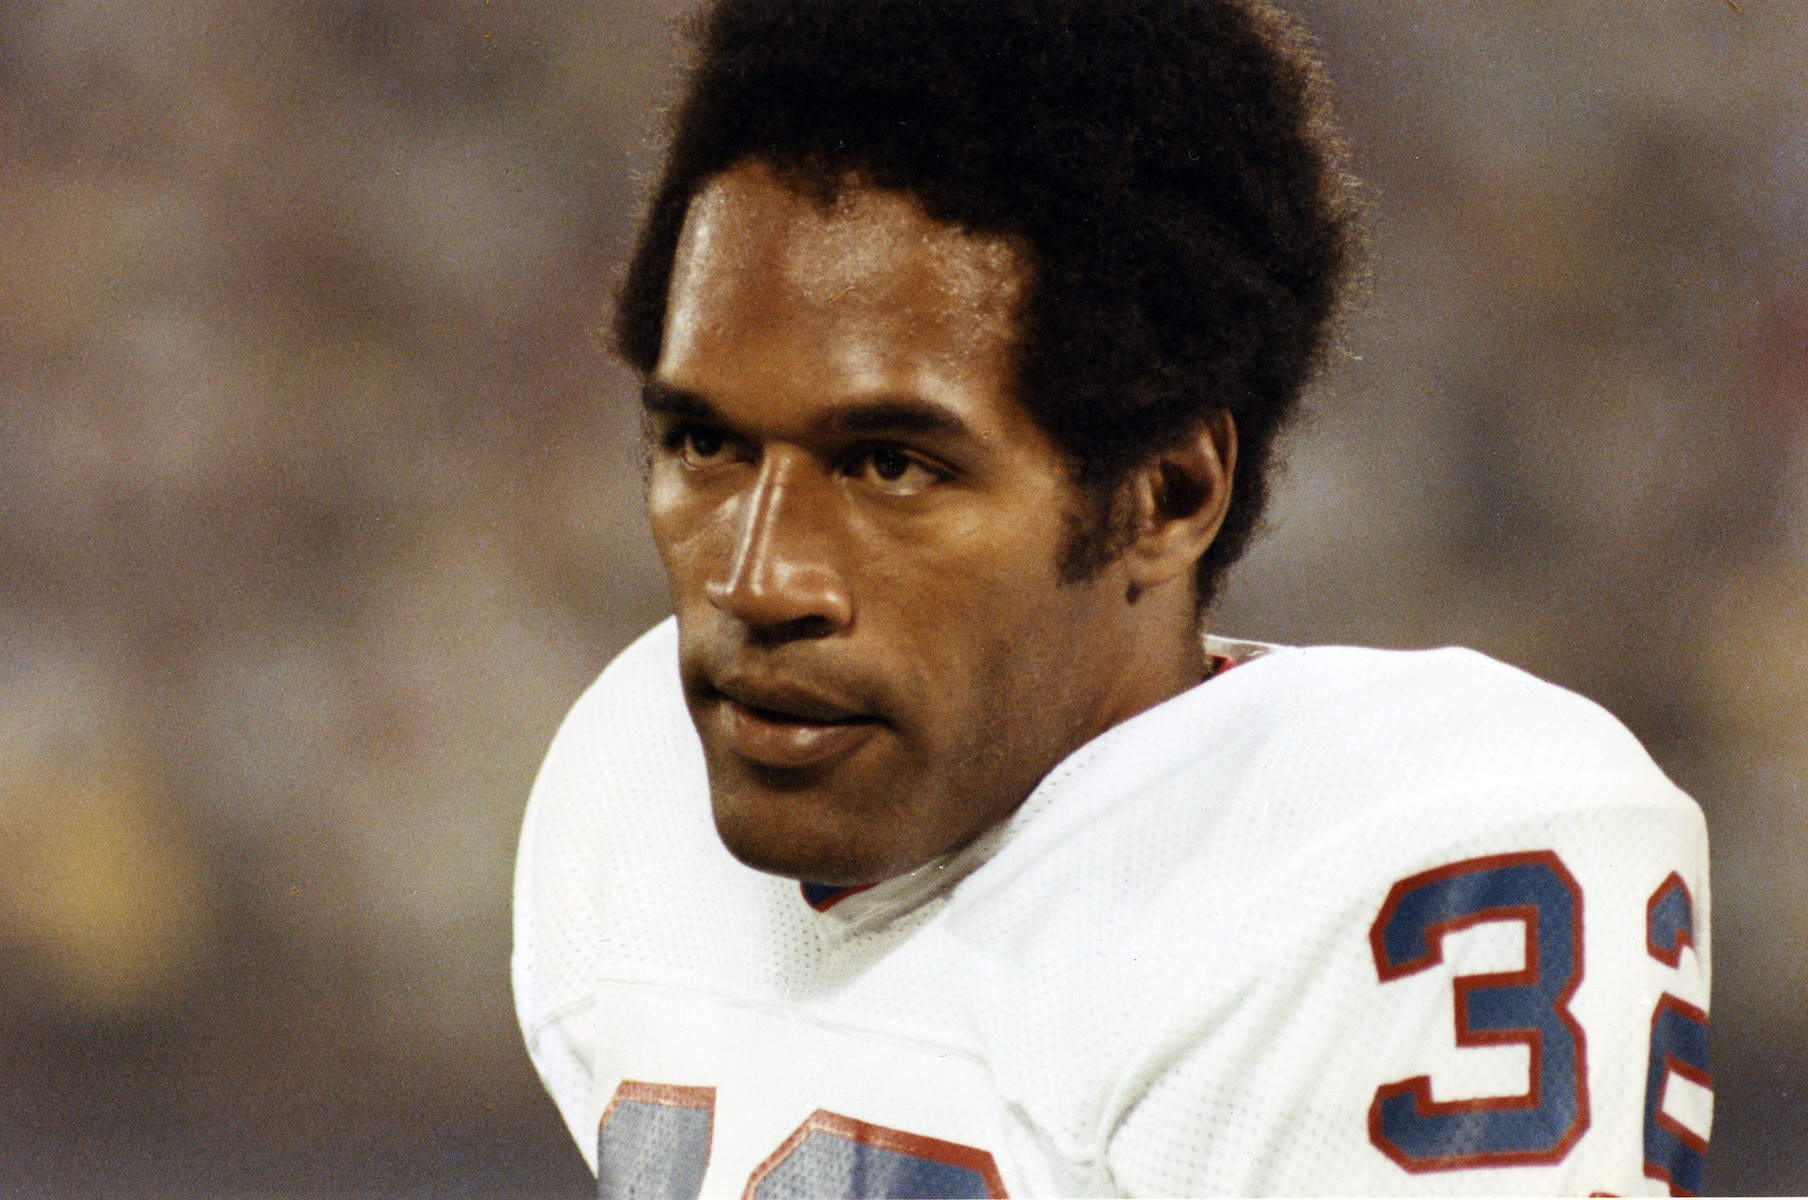 O.J. Simpson of the Buffalo Bills looks on during an NFL game circa 1975